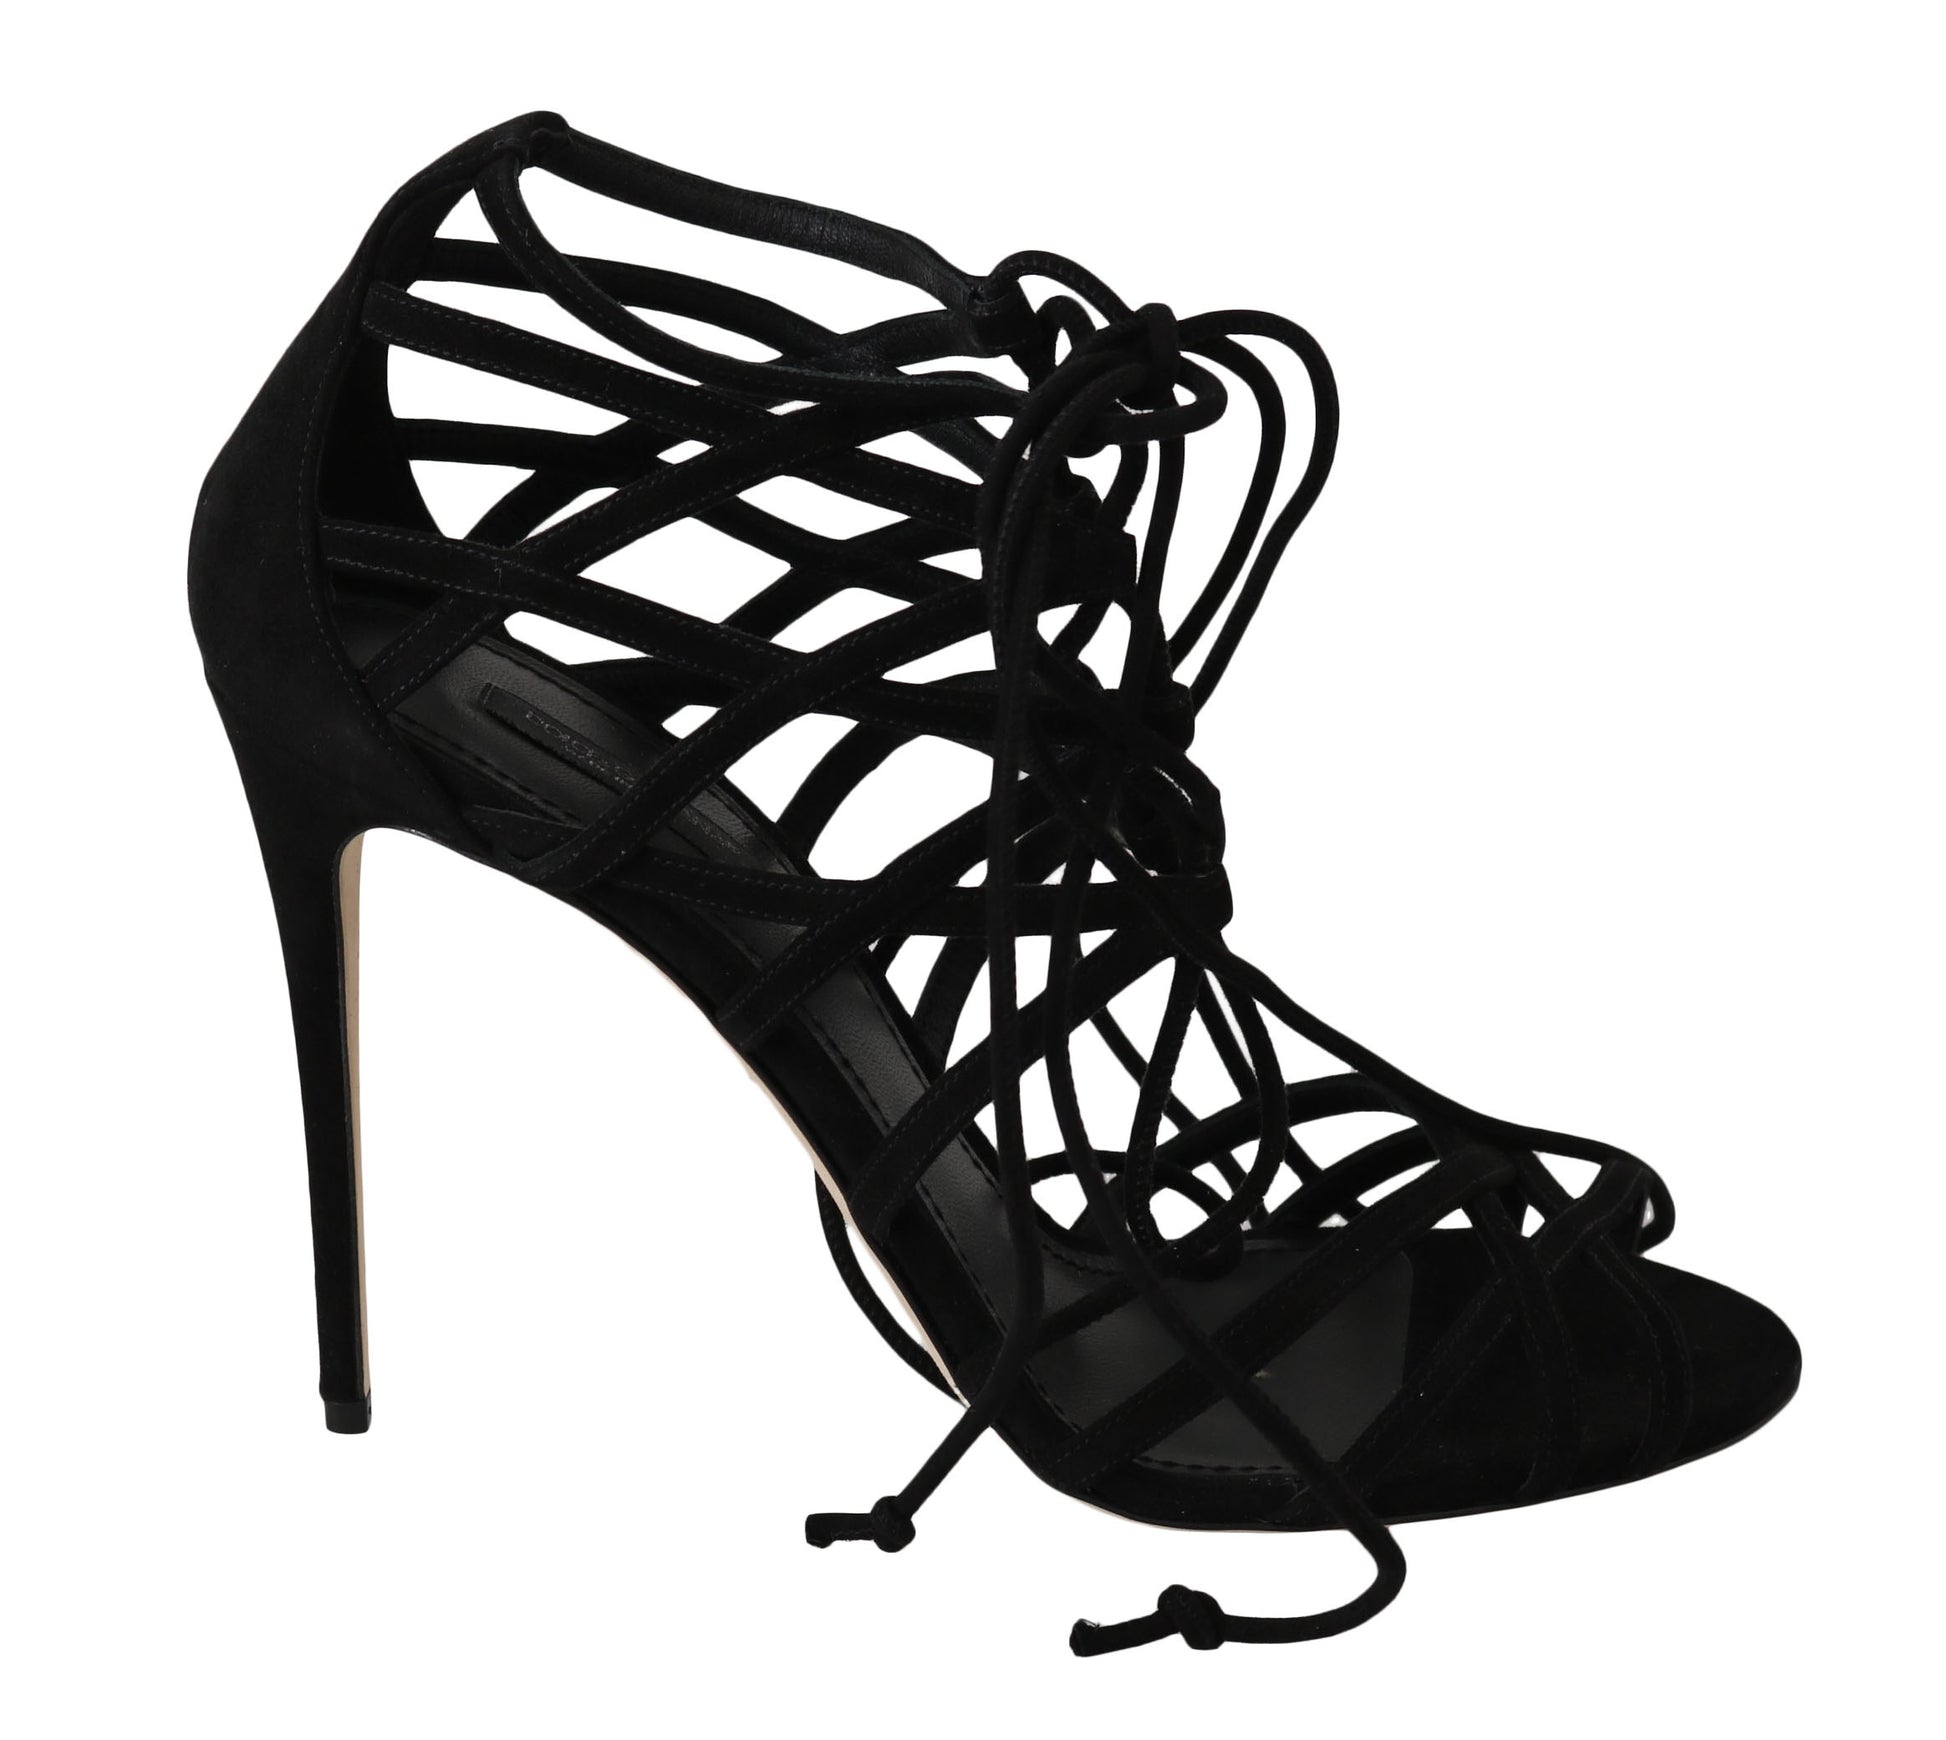 Black Suede Strap Stilettos Sandals - Designed by Dolce & Gabbana Available to Buy at a Discounted Price on Moon Behind The Hill Online Designer Discount Store